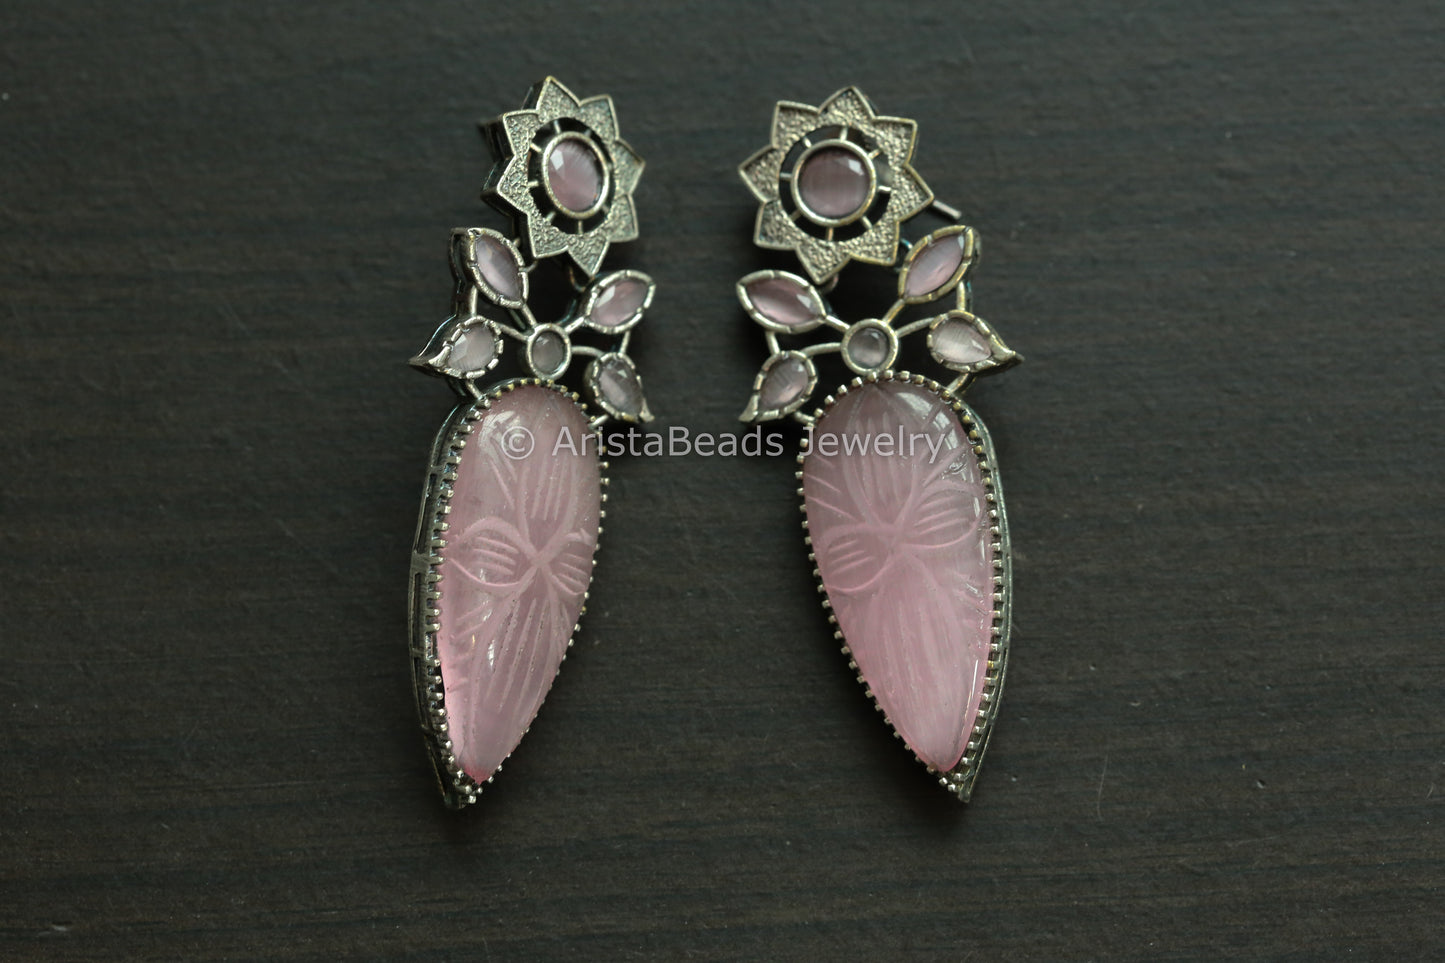 Large Oxidized Carved Stone Earrings - Pink